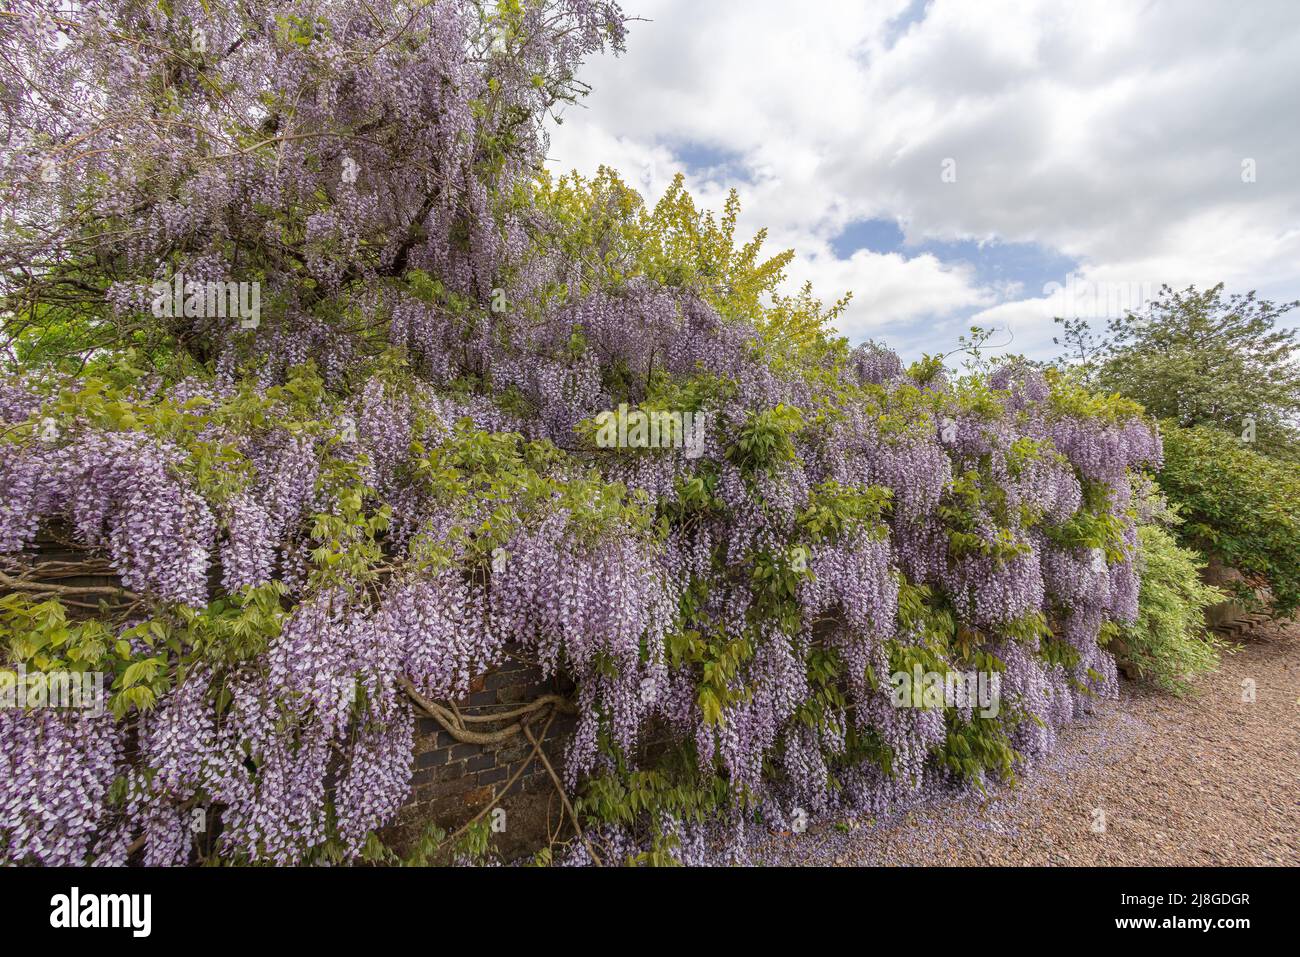 Very large ornamental tree Wisteria Sinensis or Chinese Wisteria growing against brick wall. Stock Photo